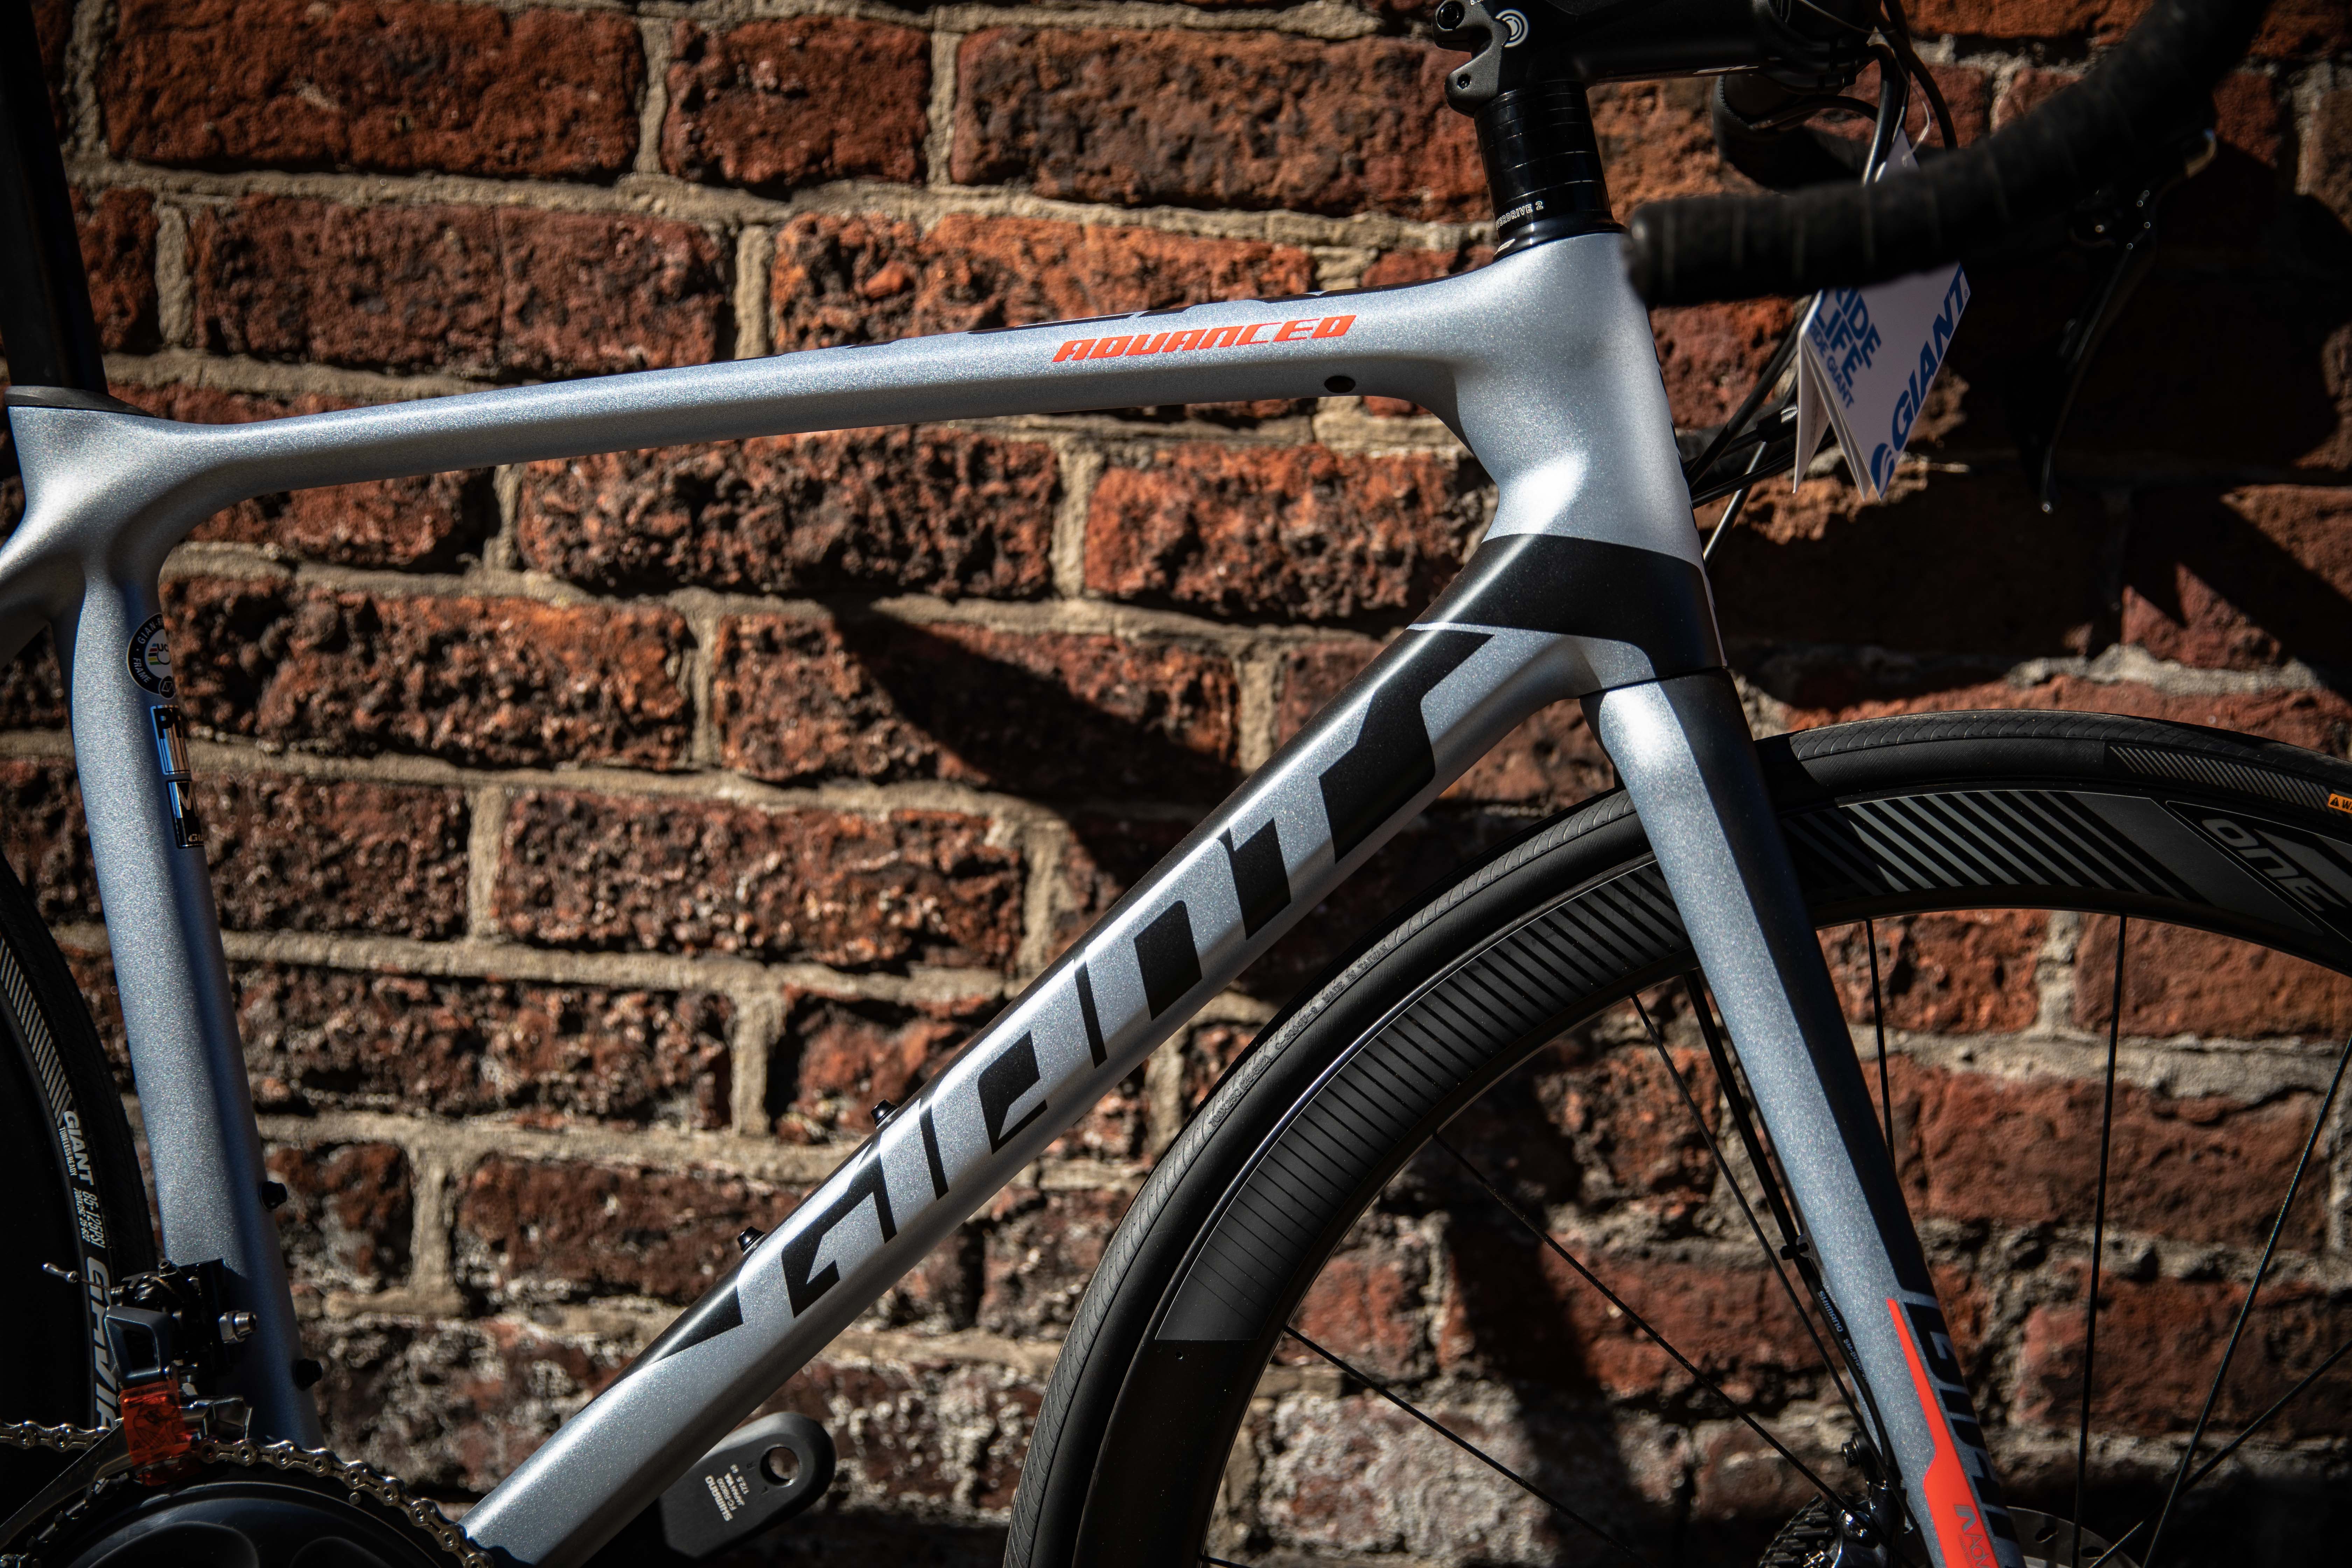 Giant Tcr Advanced Pro 1 Disc 2019 Review | Cyclestore Blog